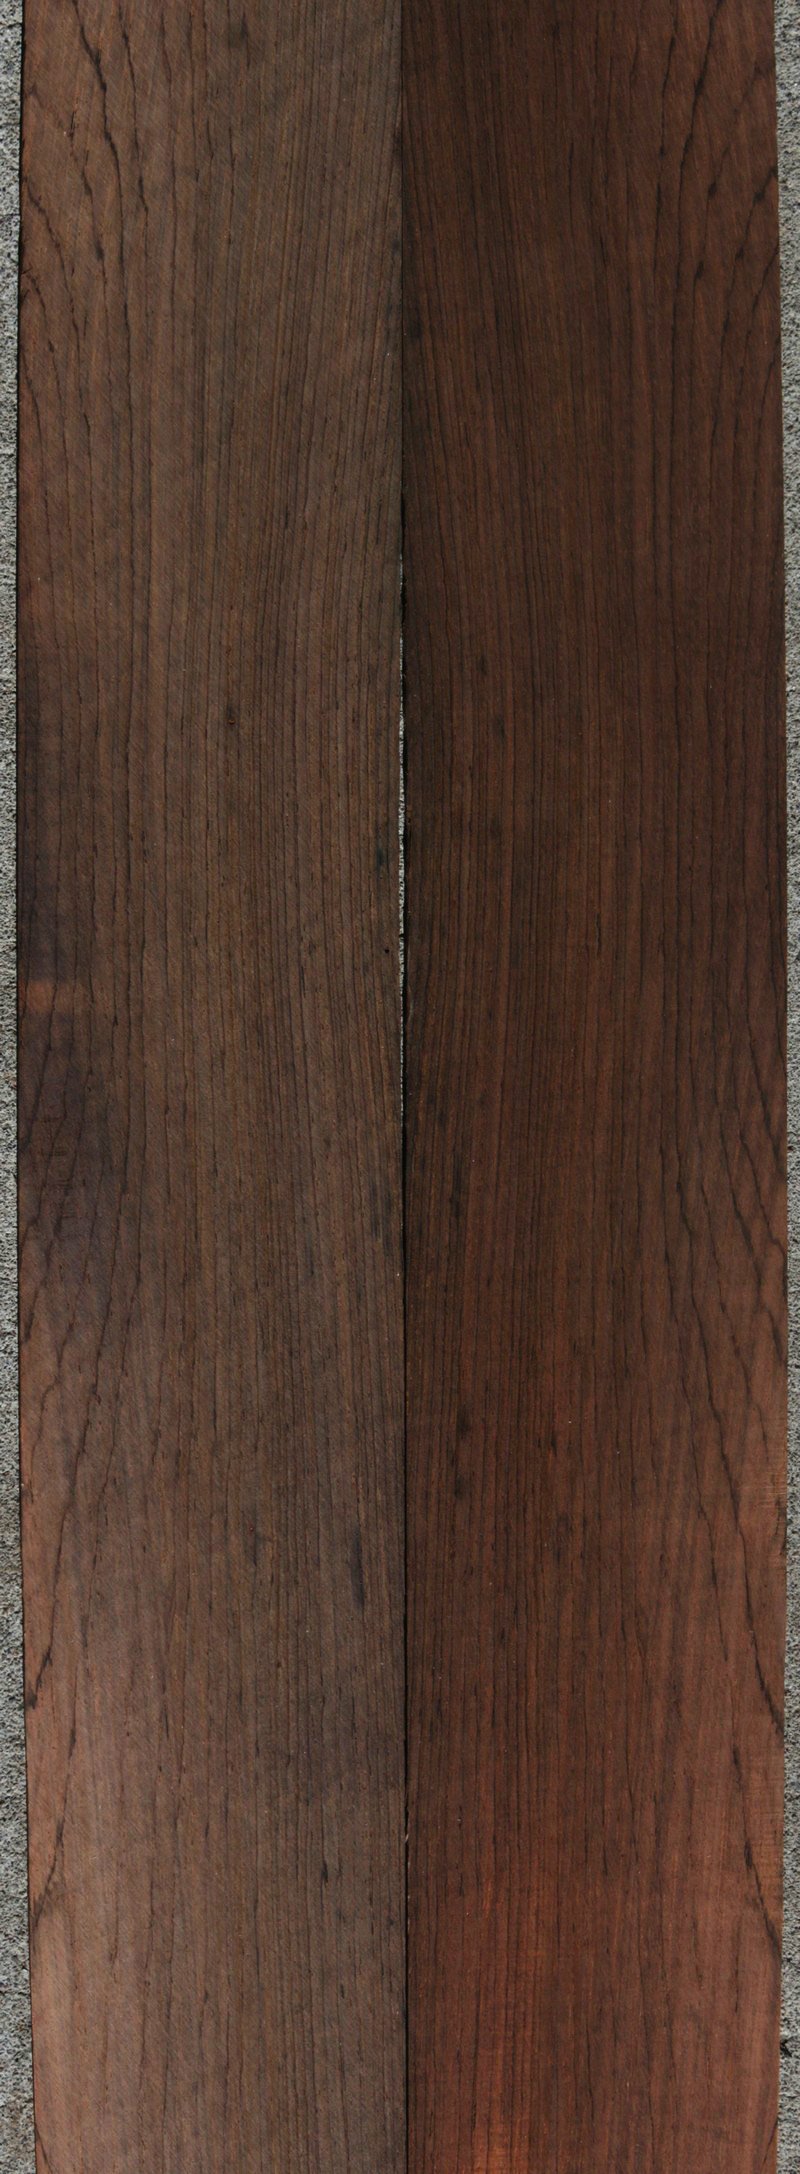 Brazilian Rosewood Bookmatched Micro Lumber